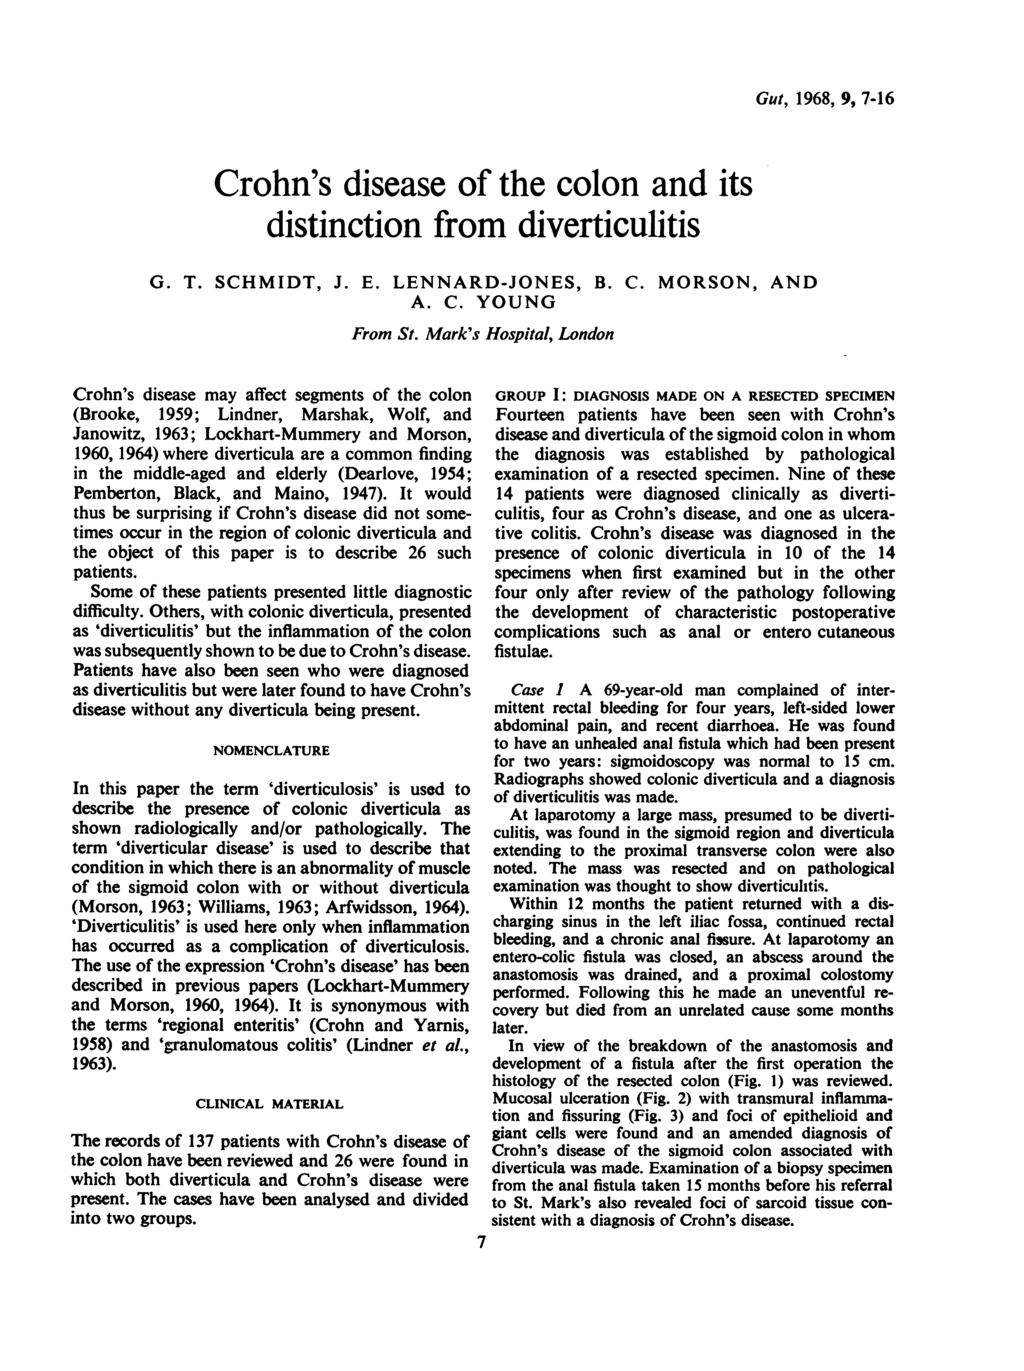 Crohn's disease of the colon and its distinction from diverticulitis G. T. SCHMIDT, J. E. LENNARD-JONES, B. C. MORSON, AND A. C. YOUNG From St.